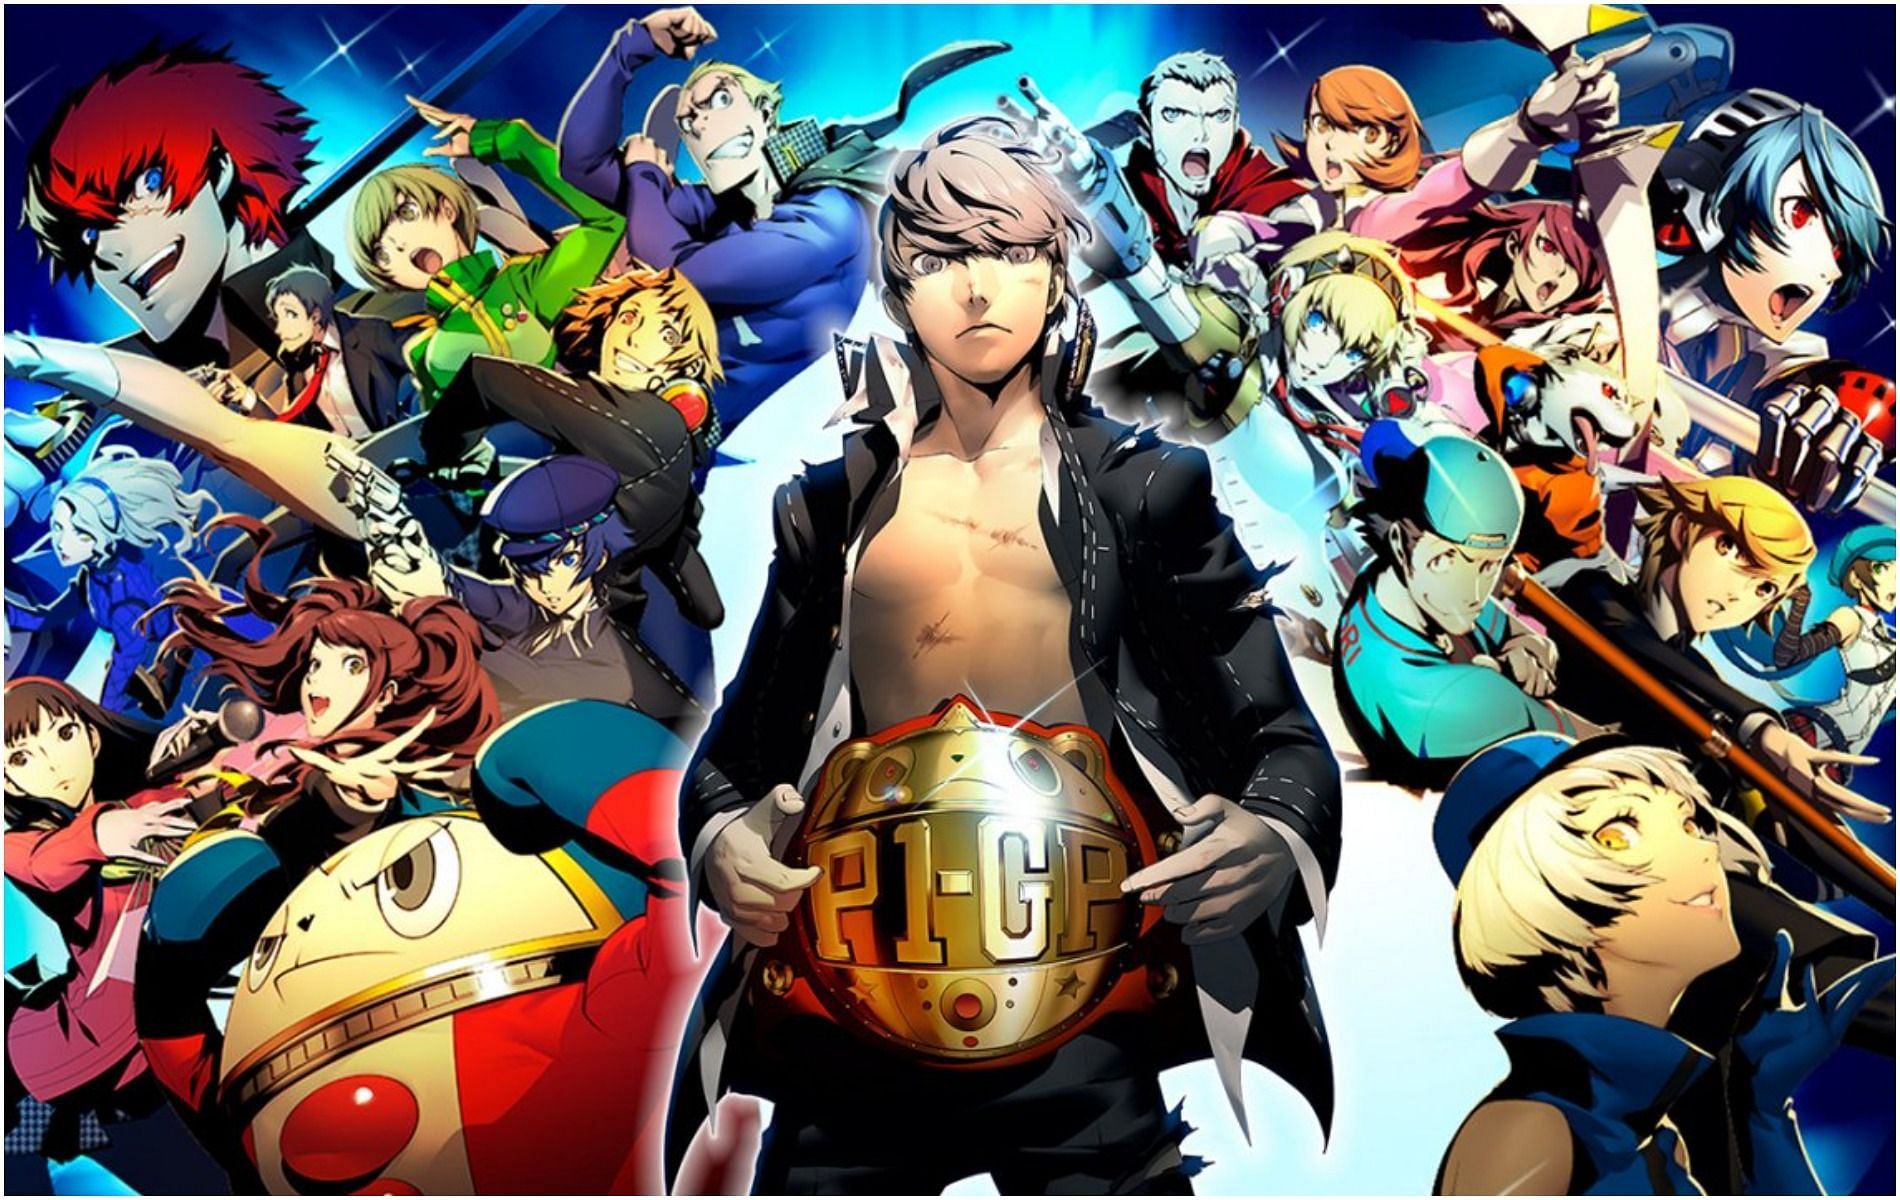 Persona 4 Arena Ultimax is an upcoming sequel to the 2014 Persona 4 Arena f...